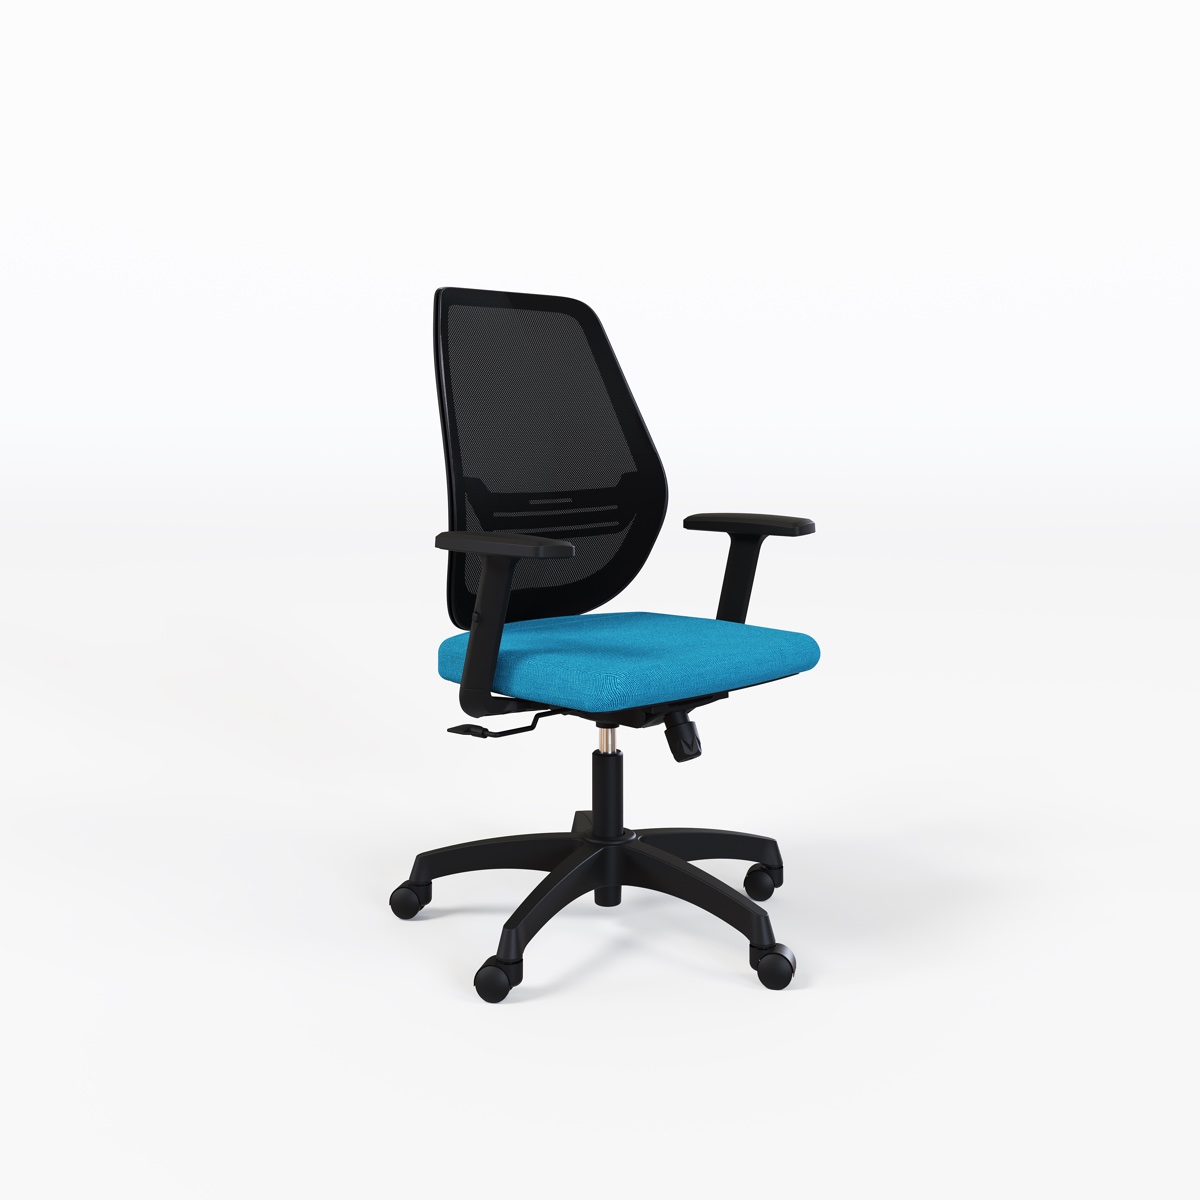 black office chair with arms